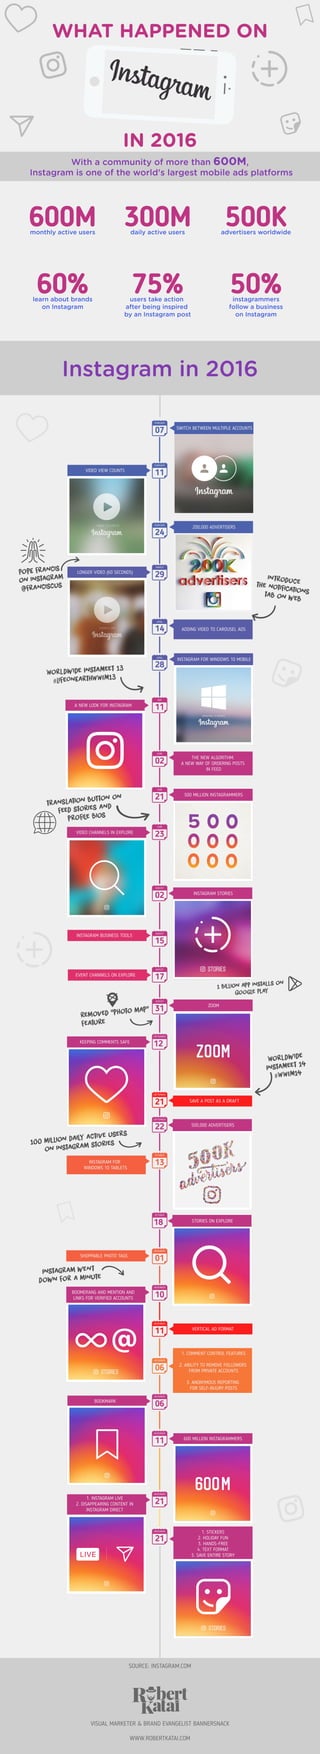 With a community of more than 600M,
Instagram is one of the world's largest mobile ads platforms
Instagram in 2016
monthly active users
600M daily active users
300M advertisers worldwide
500K
learn about brands
on Instagram
60% users take action
after being inspired
by an Instagram post
75% instagrammers
follow a business
on Instagram
50%
WHAT HAPPENED ON
IN 2016
FEBRUARY
07
FEBRUARY
11
FEBRUARY
24
SWITCH BETWEEN MULTIPLE ACCOUNTS
200,000 ADVERTISERS
MARCH
29
VIDEO VIEW COUNTS
LONGER VIDEO (60 SECONDS)
28
INSTAGRAM FOR WINDOWS 10 MOBILE
THE NEW ALGORITHM:
A NEW WAY OF ORDERING POSTS
IN FEED
SAVE A POST AS A DRAFT
VERTICAL AD FORMAT
1. COMMENT CONTROL FEATURES
2. ABILITY TO REMOVE FOLLOWERS
FROM PRIVATE ACCOUNTS
3. ANONYMOUS REPORTING
FOR SELF-INJURY POSTS
INSTAGRAM STORIES
ADDING VIDEO TO CAROUSEL ADS
MAY
11
JUNE
02
JUNE
21
AUGUST
02
AUGUST
15
JUNE
23
AUGUST
17
AUGUST
31
SEPTEMBER
12
SEPTEMBER
21
OCTOBER
13
OCTOBER
18
NOVEMBER
01
SEPTEMBER
22
A NEW LOOK FOR INSTAGRAM
VIDEO CHANNELS IN EXPLORE
KEEPING COMMENTS SAFE
SHOPPABLE PHOTO TAGS
NOVEMBER
10
NOVEMBER
11
DECEMBER
06
DECEMBER
06
600 MILLION INSTAGRAMMERS
NOVEMBER
11
NOVEMBER
21
NOVEMBER
21
BOOMERANG AND MENTION AND
LINKS FOR VERIFIED ACCOUNTS
BOOKMARK
1. INSTAGRAM LIVE
2. DISAPPEARING CONTENT IN
INSTAGRAM DIRECT
INSTAGRAM BUSINESS TOOLS
EVENT CHANNELS ON EXPLORE
INSTAGRAM FOR
WINDOWS 10 TABLETS
500 MILLION INSTAGRAMMERS
APRIL
14
APRIL
ZOOM
500,000 ADVERTISERS
STORIES ON EXPLORE
1. STICKERS
2. HOLIDAY FUN
3. HANDS-FREE
4. TEXT FORMAT
5. SAVE ENTIRE STORY
SOURCE: INSTAGRAM.COM
VISUAL MARKETER & BRAND EVANGELIST BANNERSNACK
WWW.ROBERTKATAI.COM
Worldwide InstaMeet 13
#LifeOnEarthWWIM13
PopE francis
on instagram
@franciscus
introducethe notificationstab on web
translation button on
feed stories and
profile bios
Worldwide
InstaMeet 14
#WWIM14
1 billion app installs on
Google Play
Instagram went
down for a minute
100 million daily active users
on instagram stories
removed “photo map”
feature
x
 